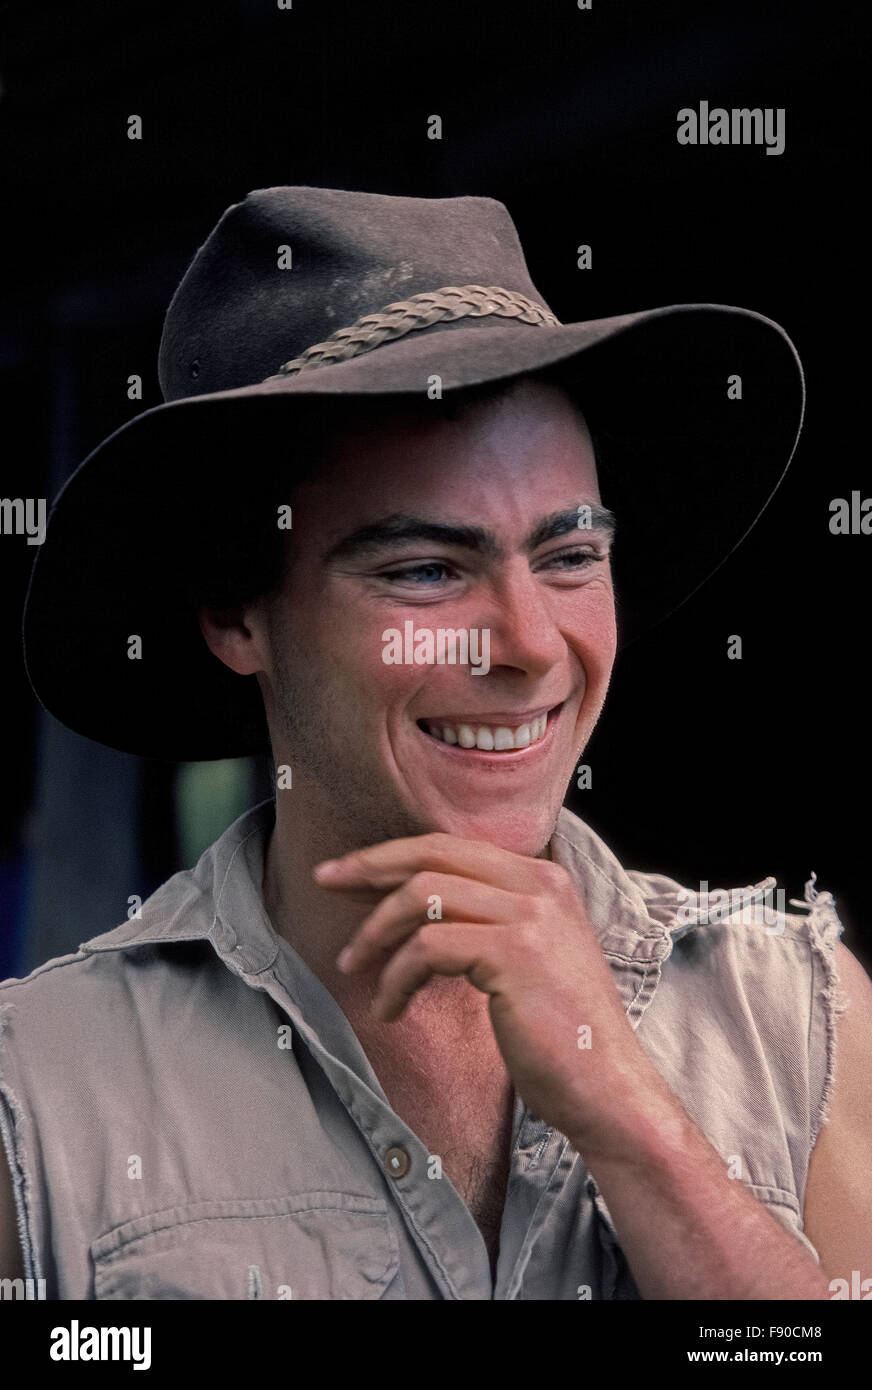 A young Aussie cowboy greets visitors with a smile in Snowy River country at Stockyard Creek near Mansfield, Victoria, Australia. Chris Stoney is also an actor who appeared in the 1988 Western adventure film, 'Return to Snowy River.' It was a sequel to the 1982 hit, 'The Man From Snowy River,' which starred Kirk Douglas and was nominated for a Golden Globe award as the Best Foreign Film. Model Released. Stock Photo